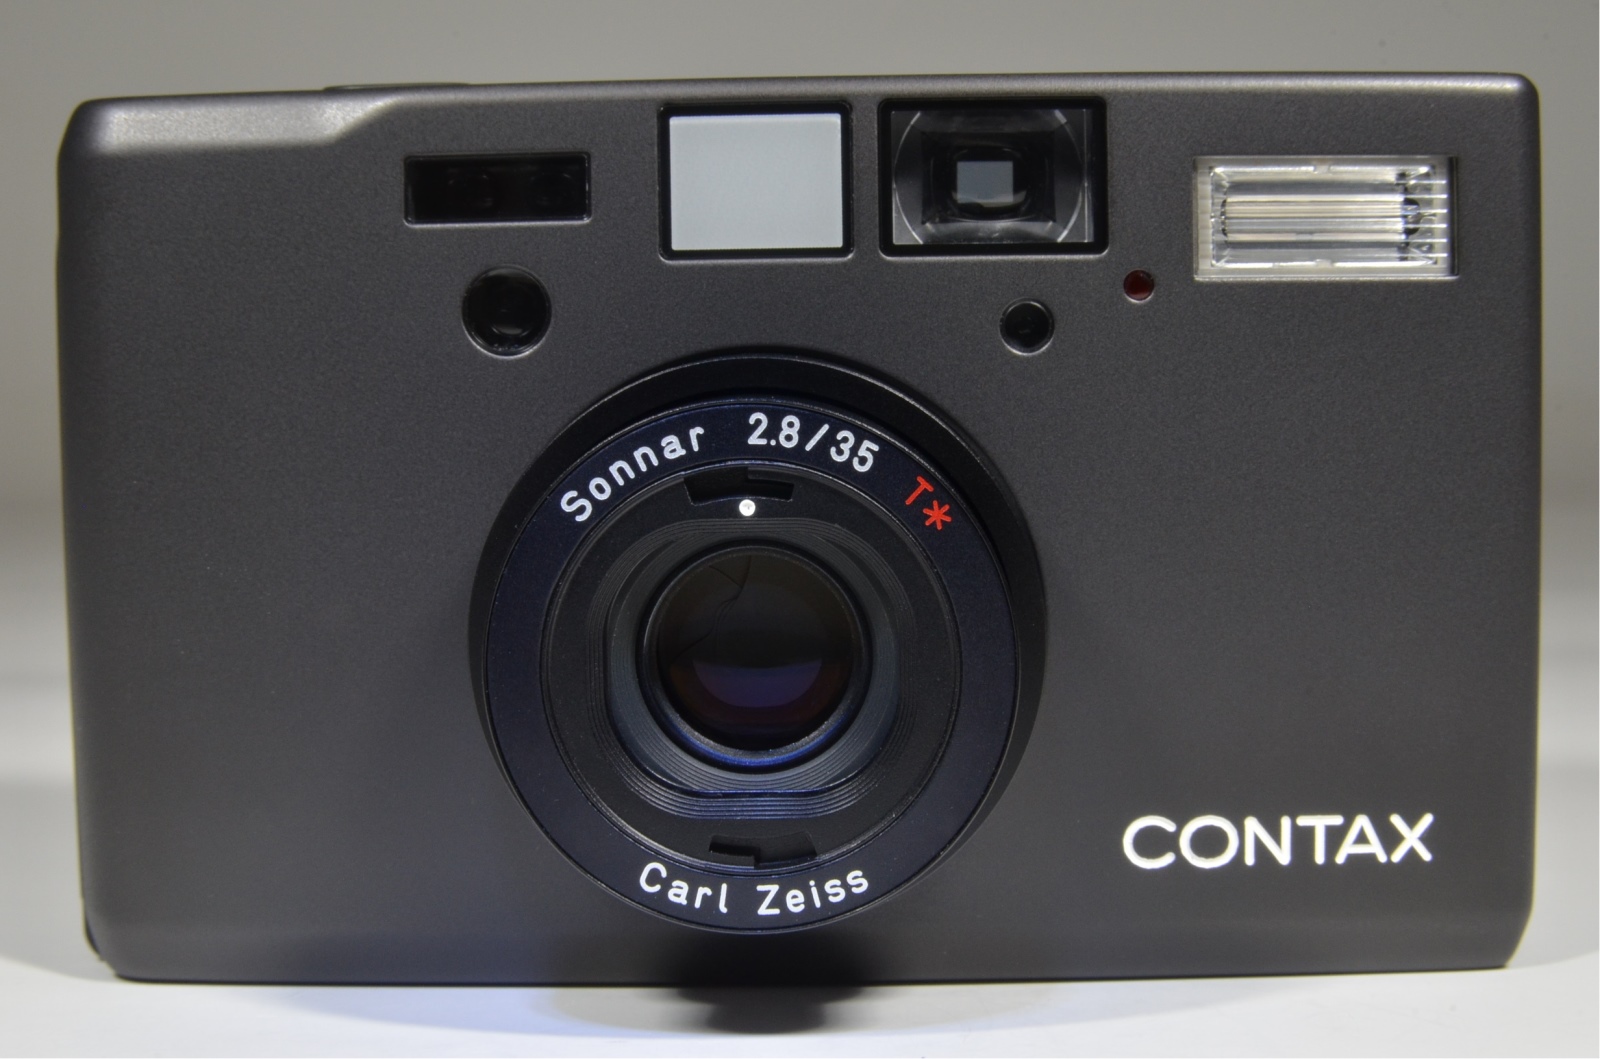 contax t3 data back black in boxed point & shoot 35mm film camera